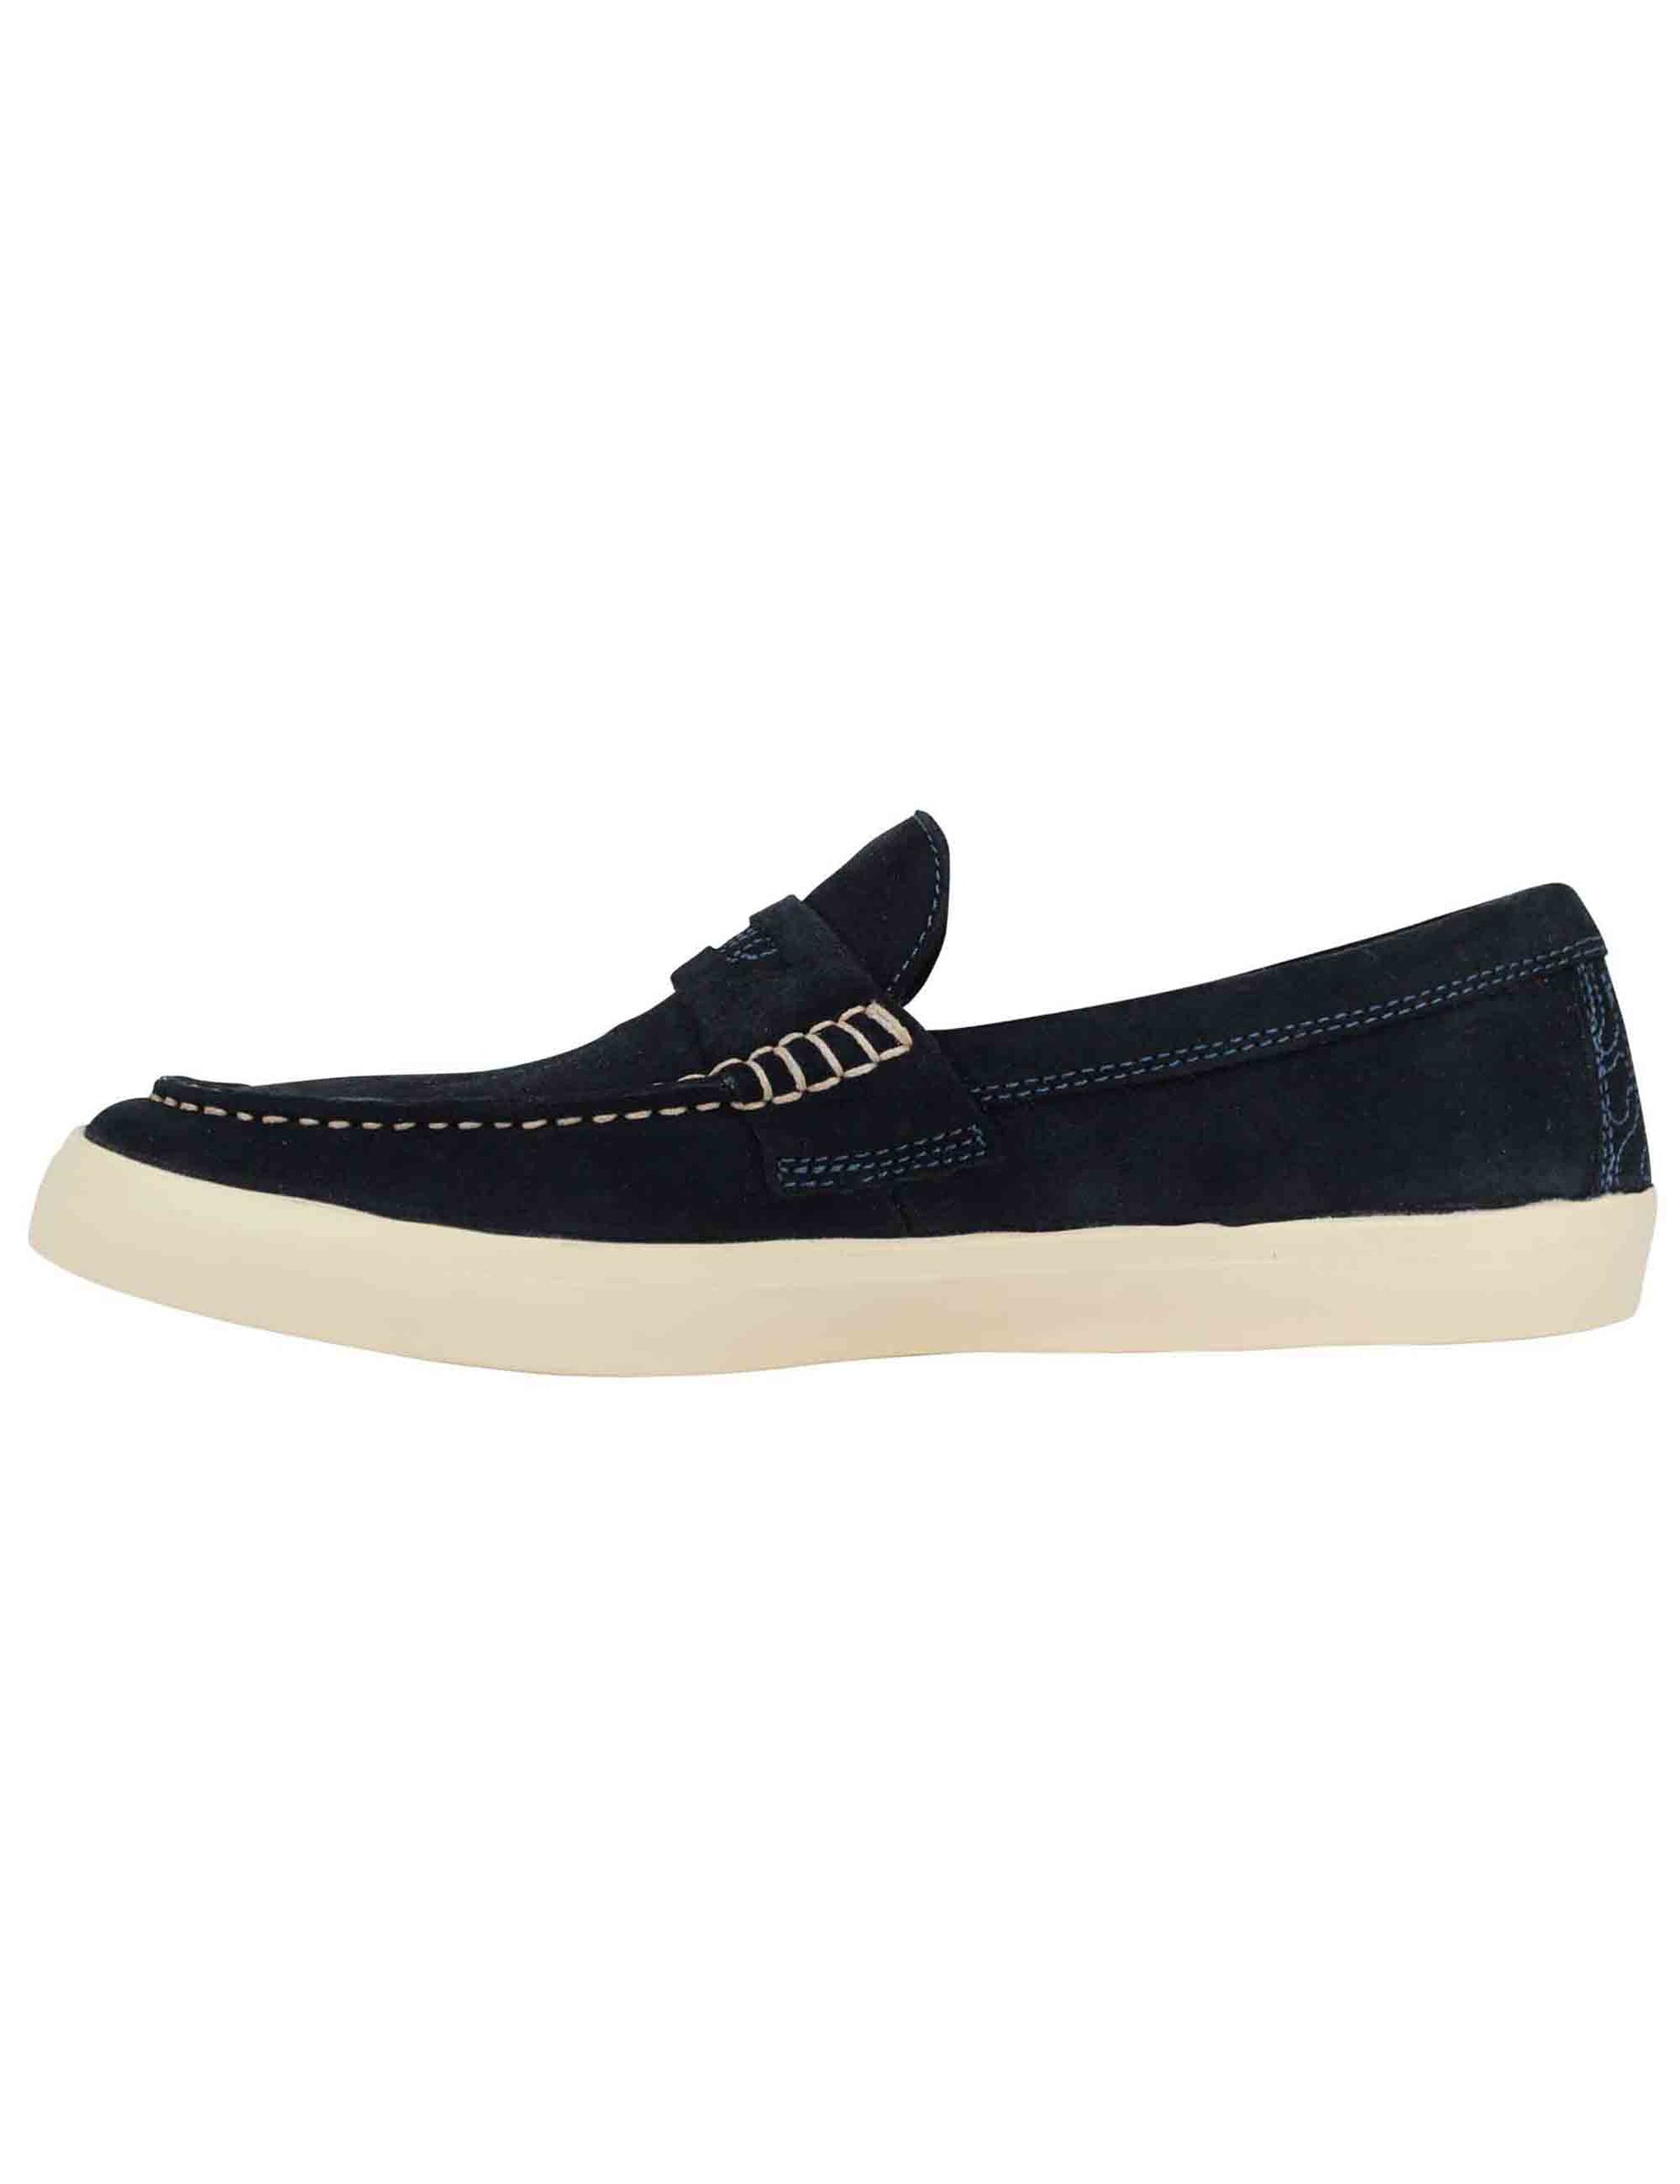 Moki Suede men's moccasins in blue suede with white rubber sole